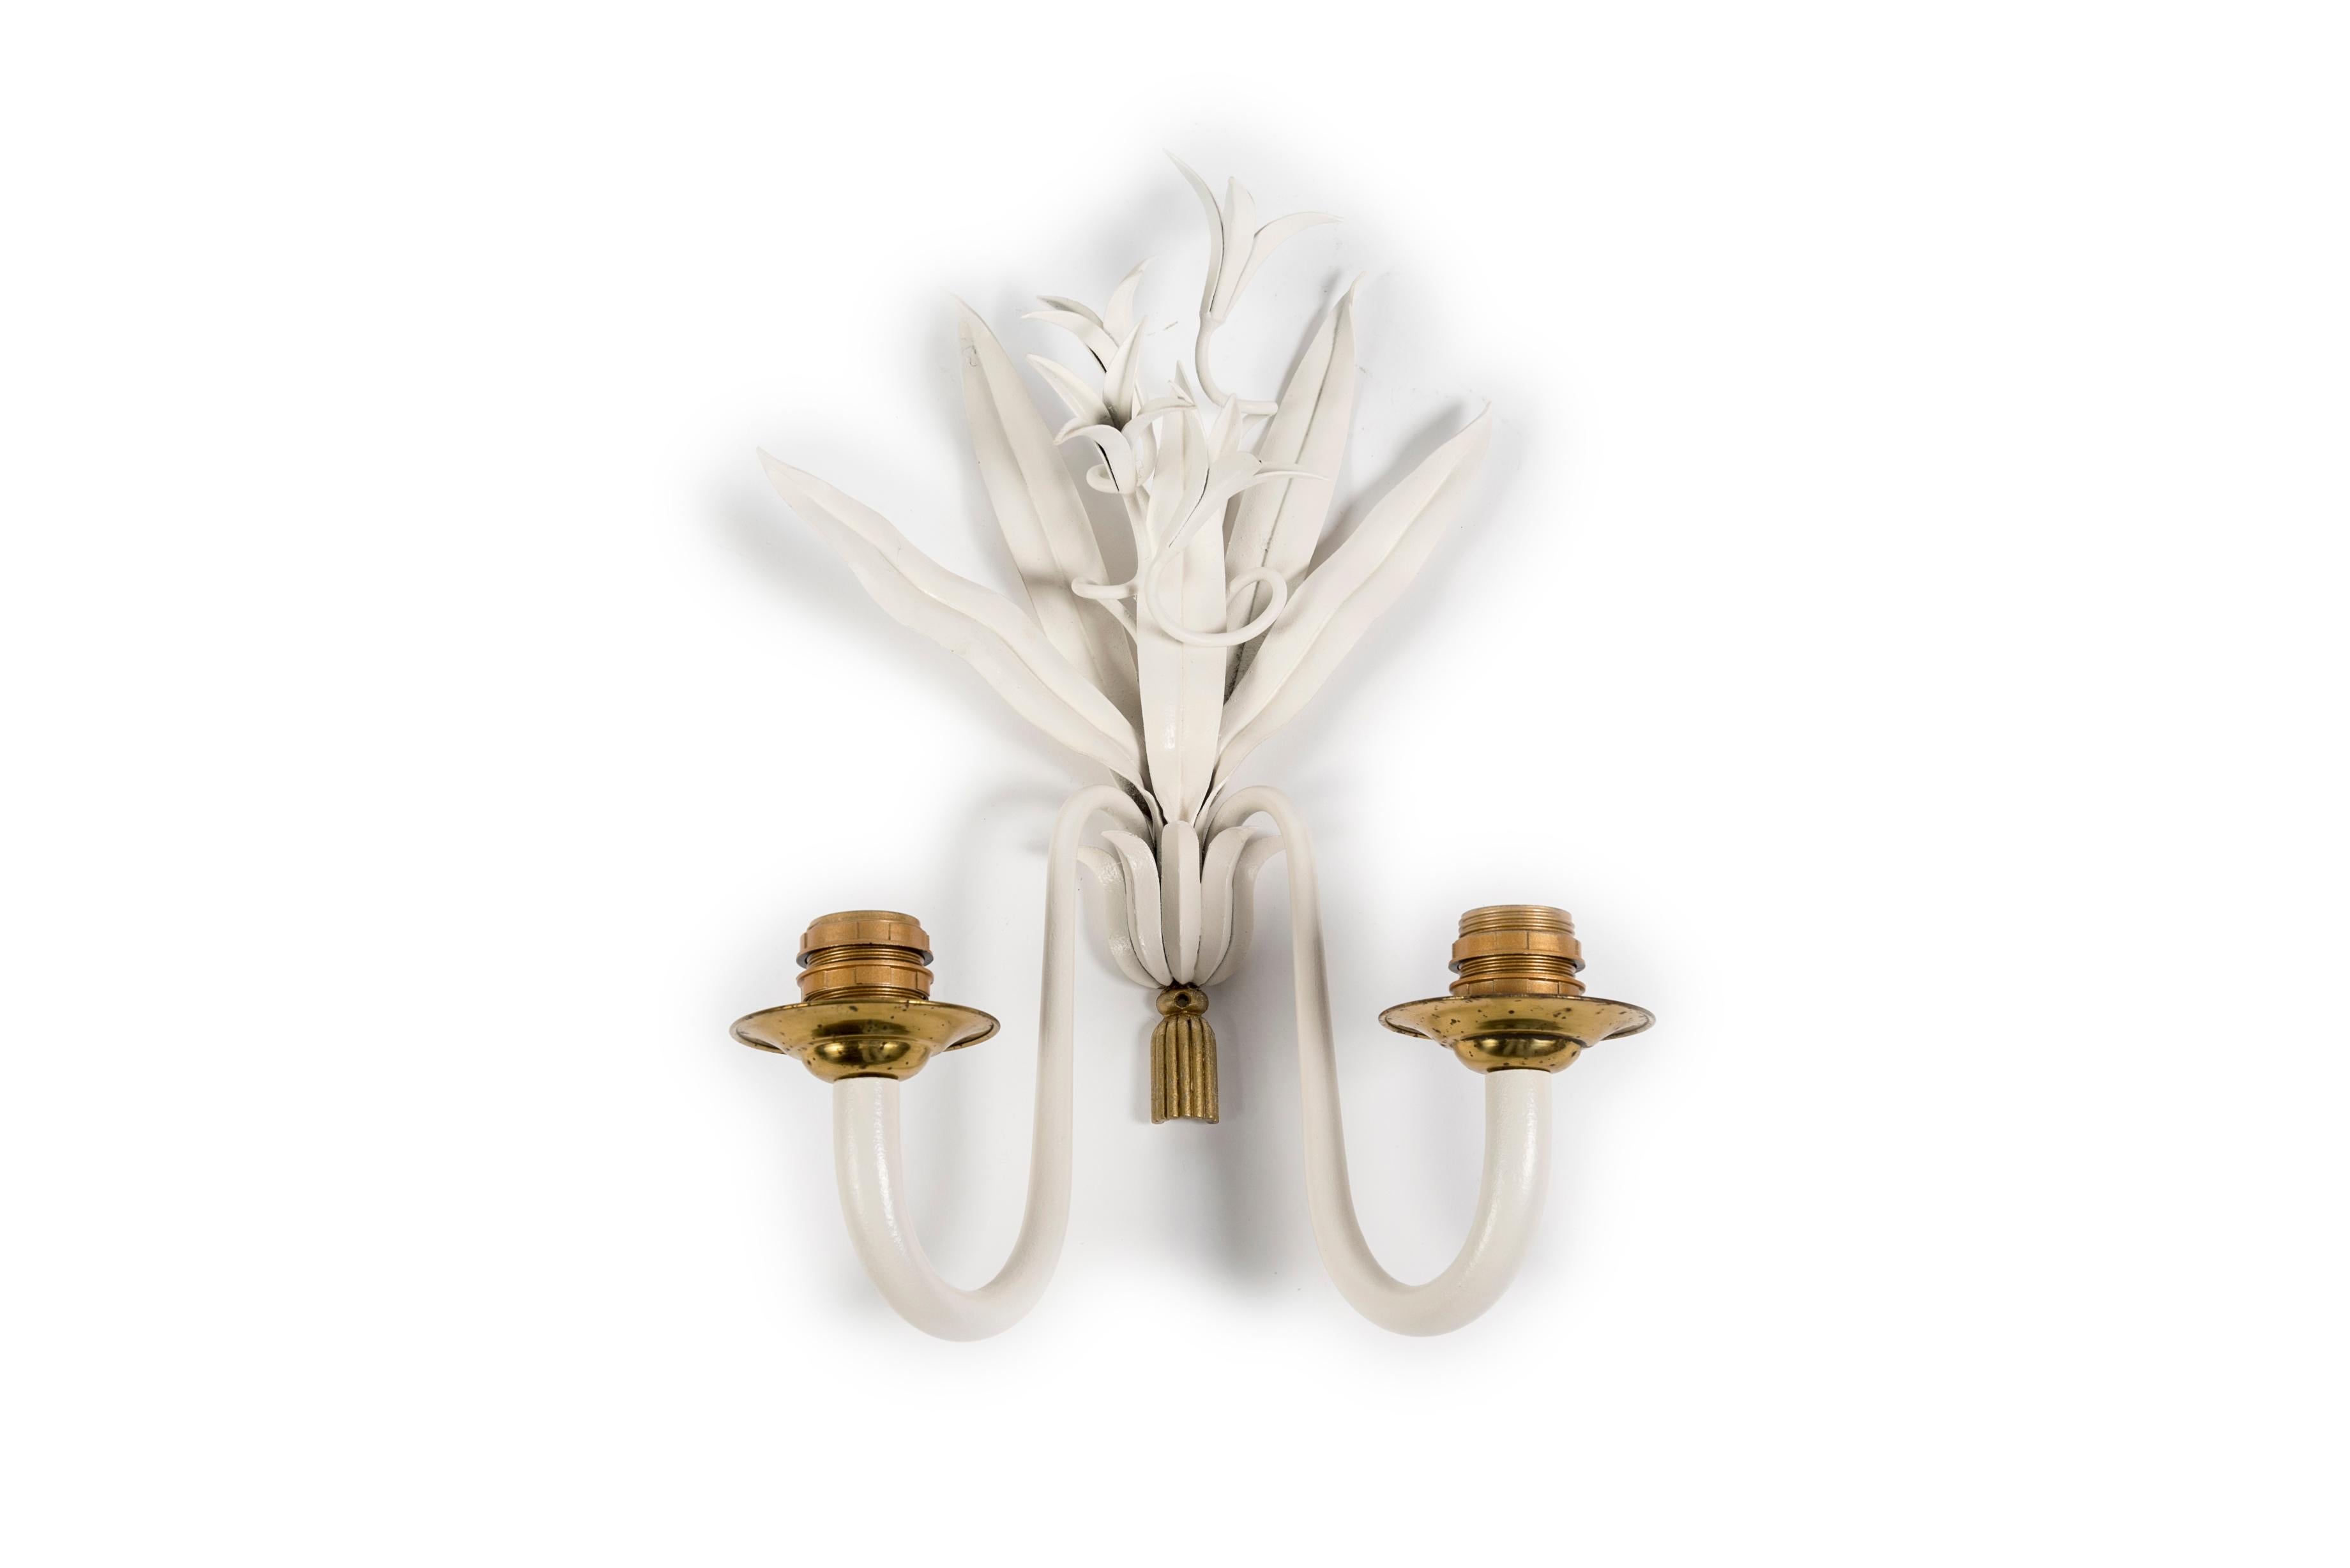 Pair of 1940's painted metal sconces attributed to Maison Baguès
Re-wired
2 light bulbs E27.